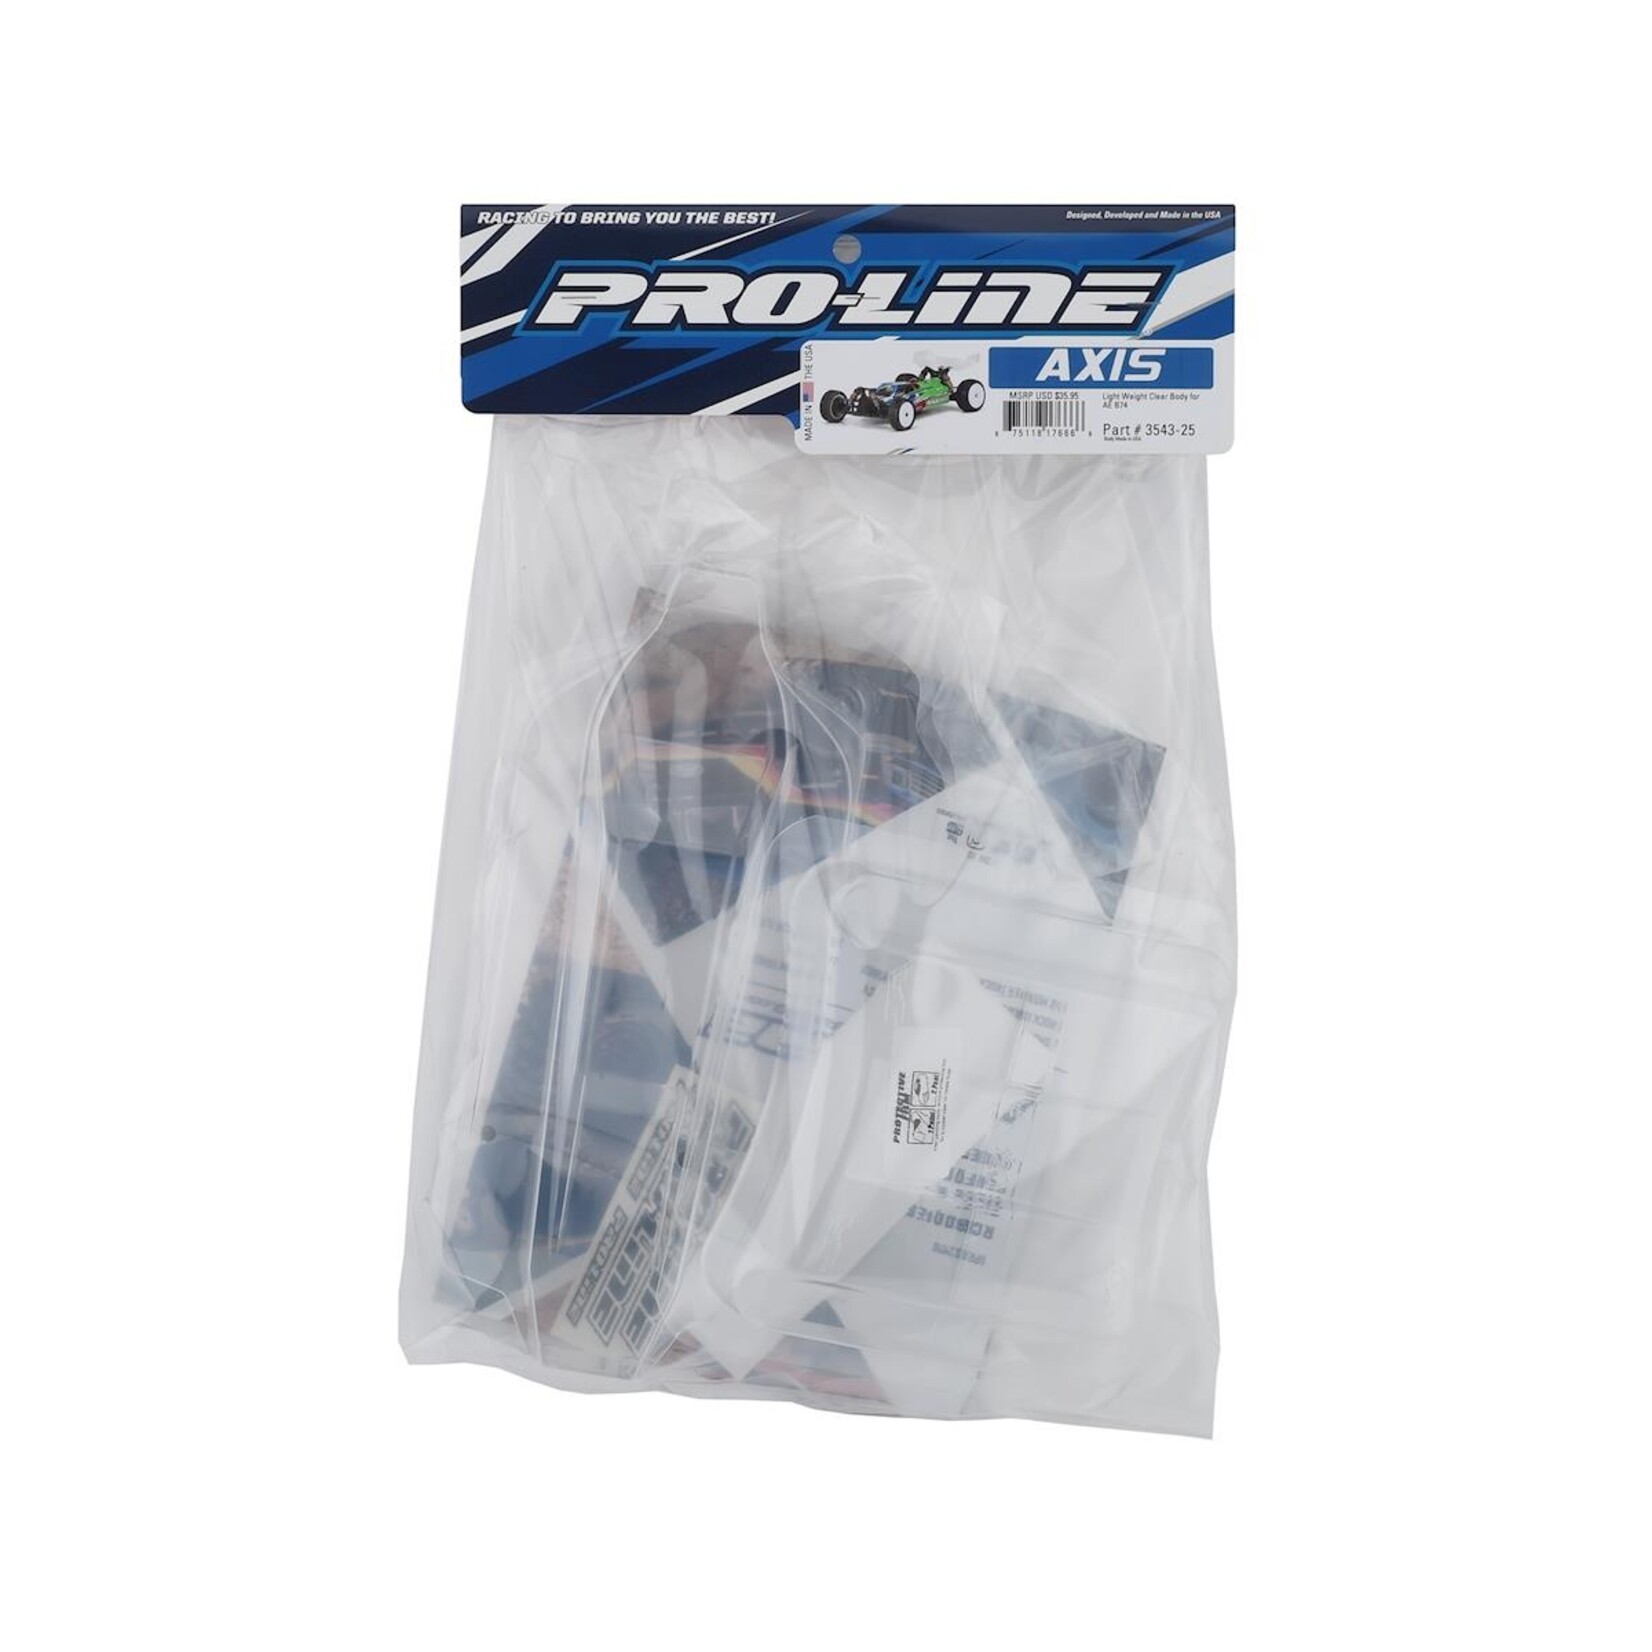 Pro-Line Pro-Line Associated RC10 B74 Axis Lightweight Body (Clear) #3543-25